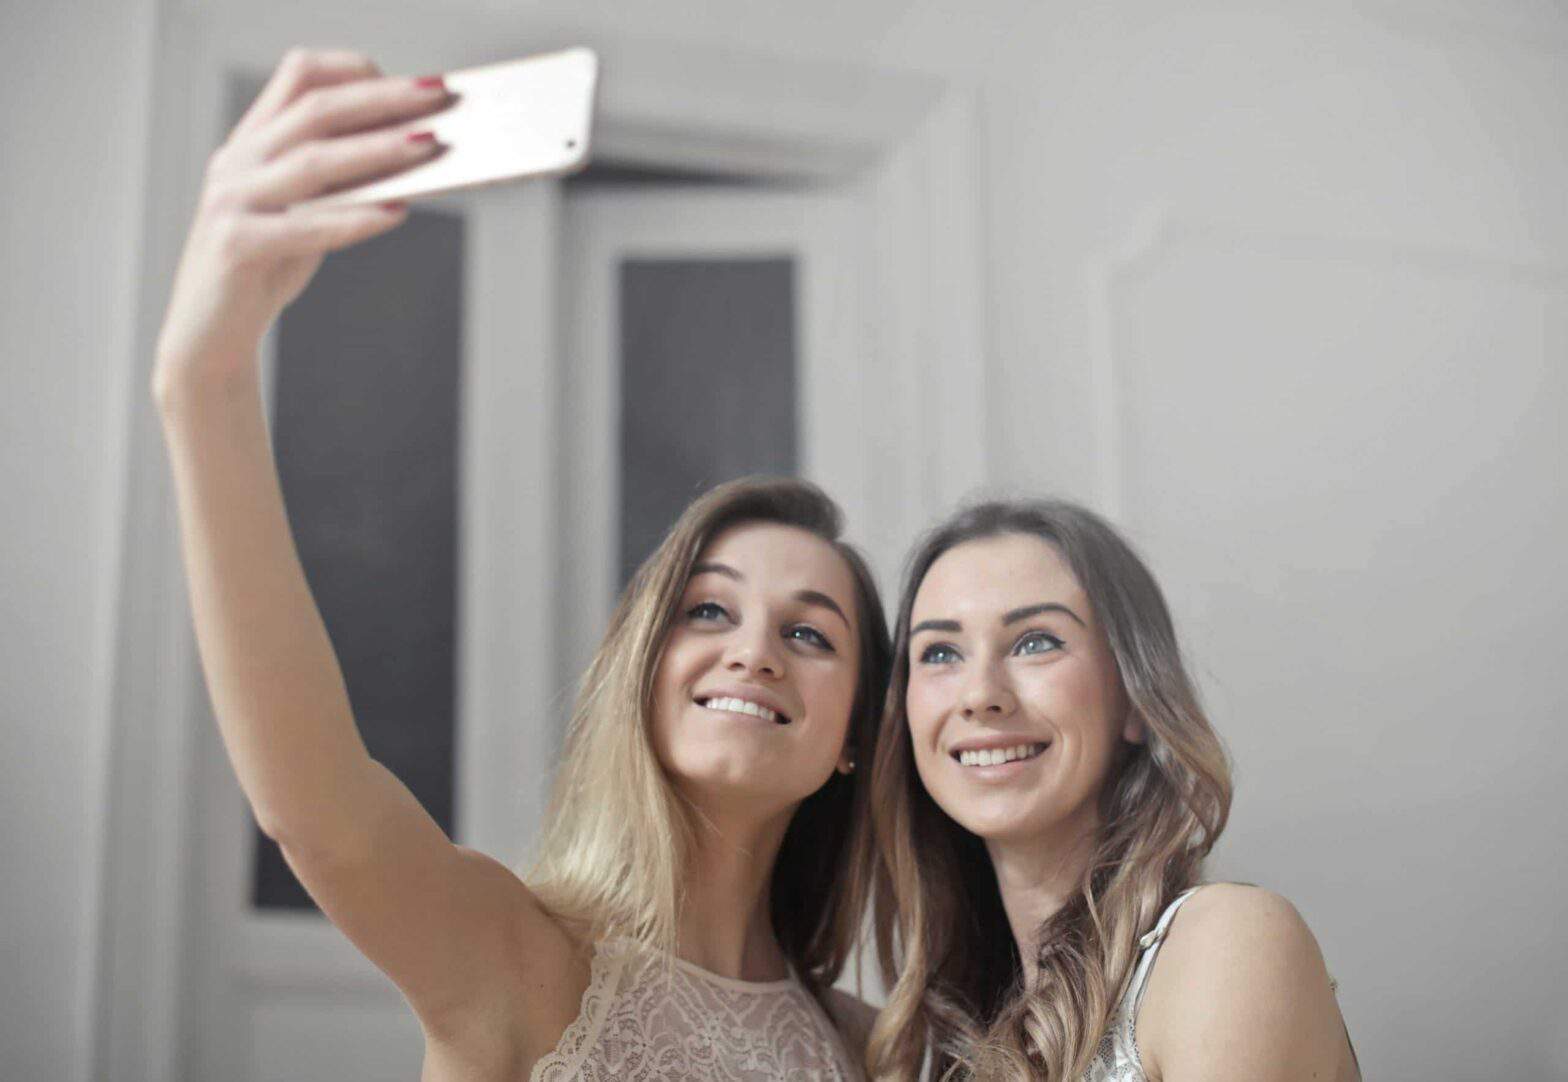 Selfie’s and Body Image: More Harm than Good?